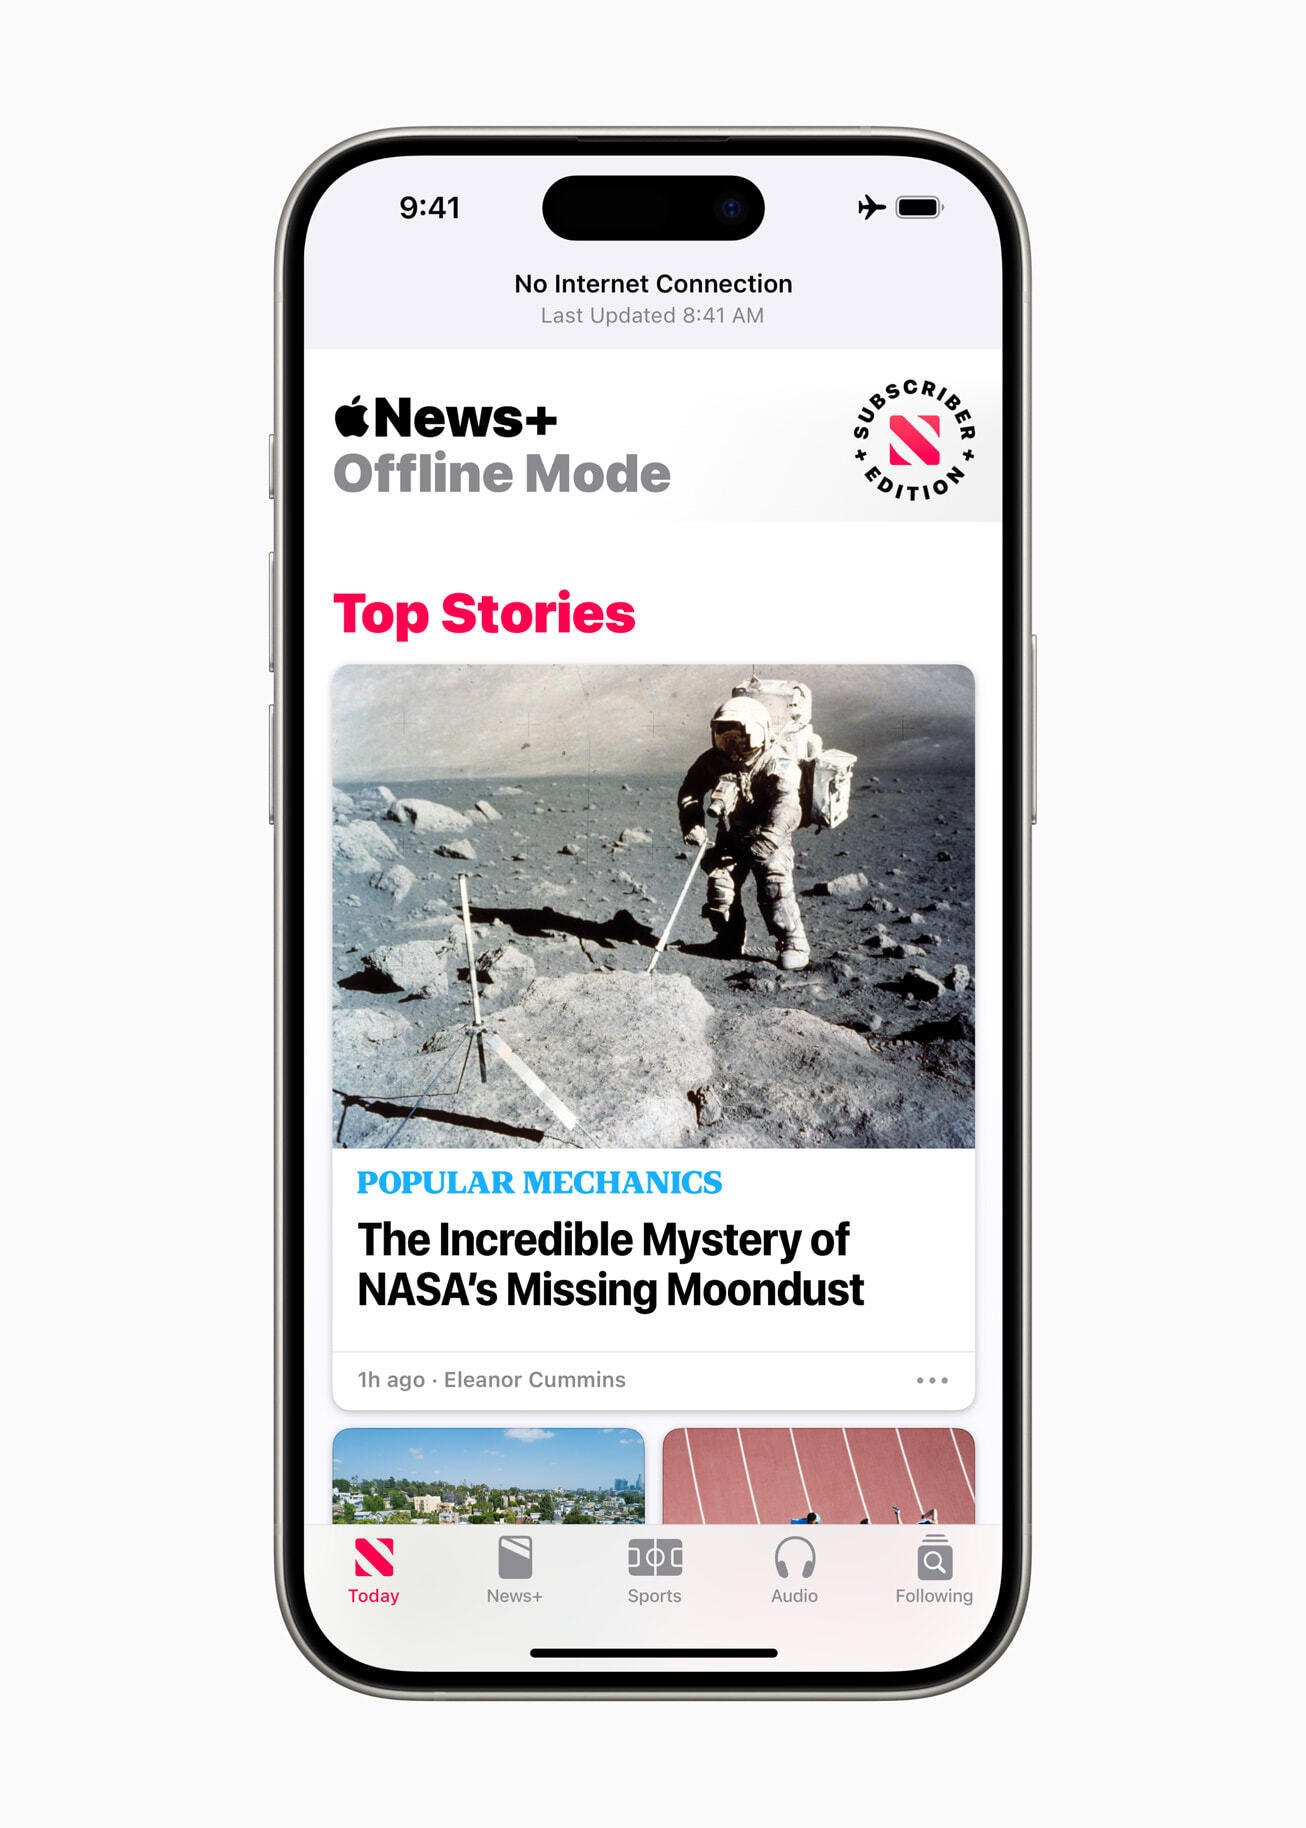 New Offline Mode for Apple News+ (Image Source - Apple) - Apple presents new spelling game Quartiles and Offline Mode for Apple News+